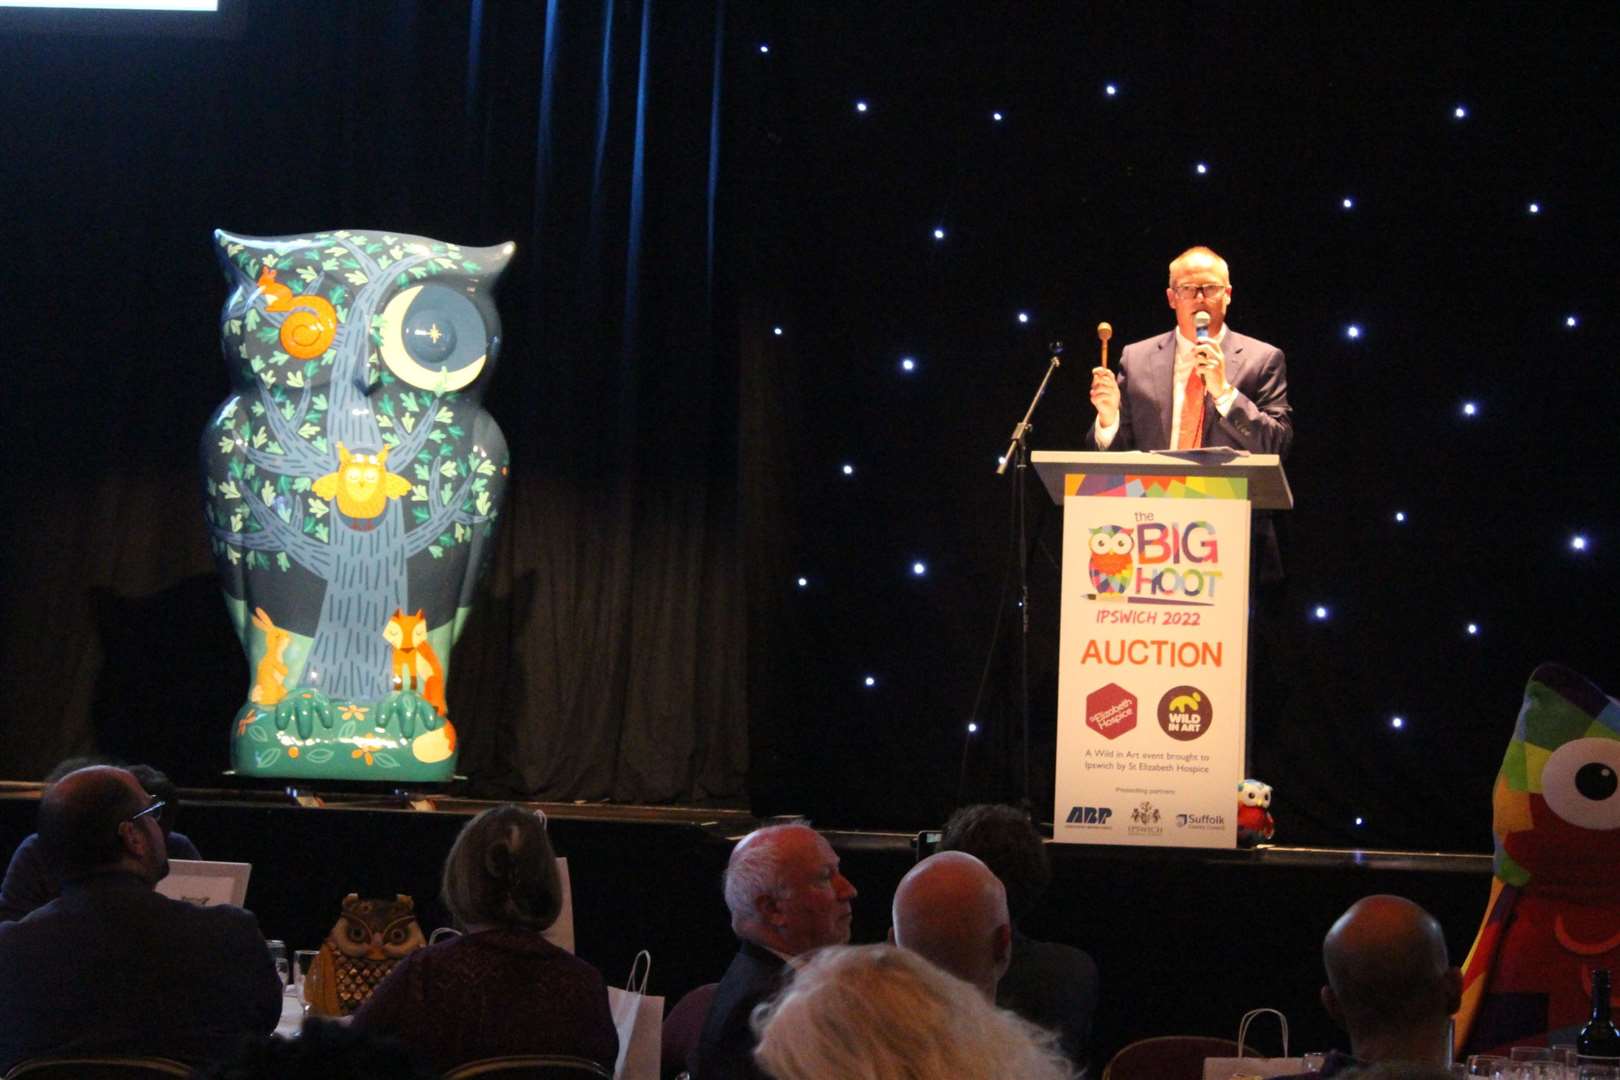 Ipswich's Big Hoot event ended with an auction, where the birds were sold to the highest bidder. Picture: St Elizabeth Hospice (59978174)